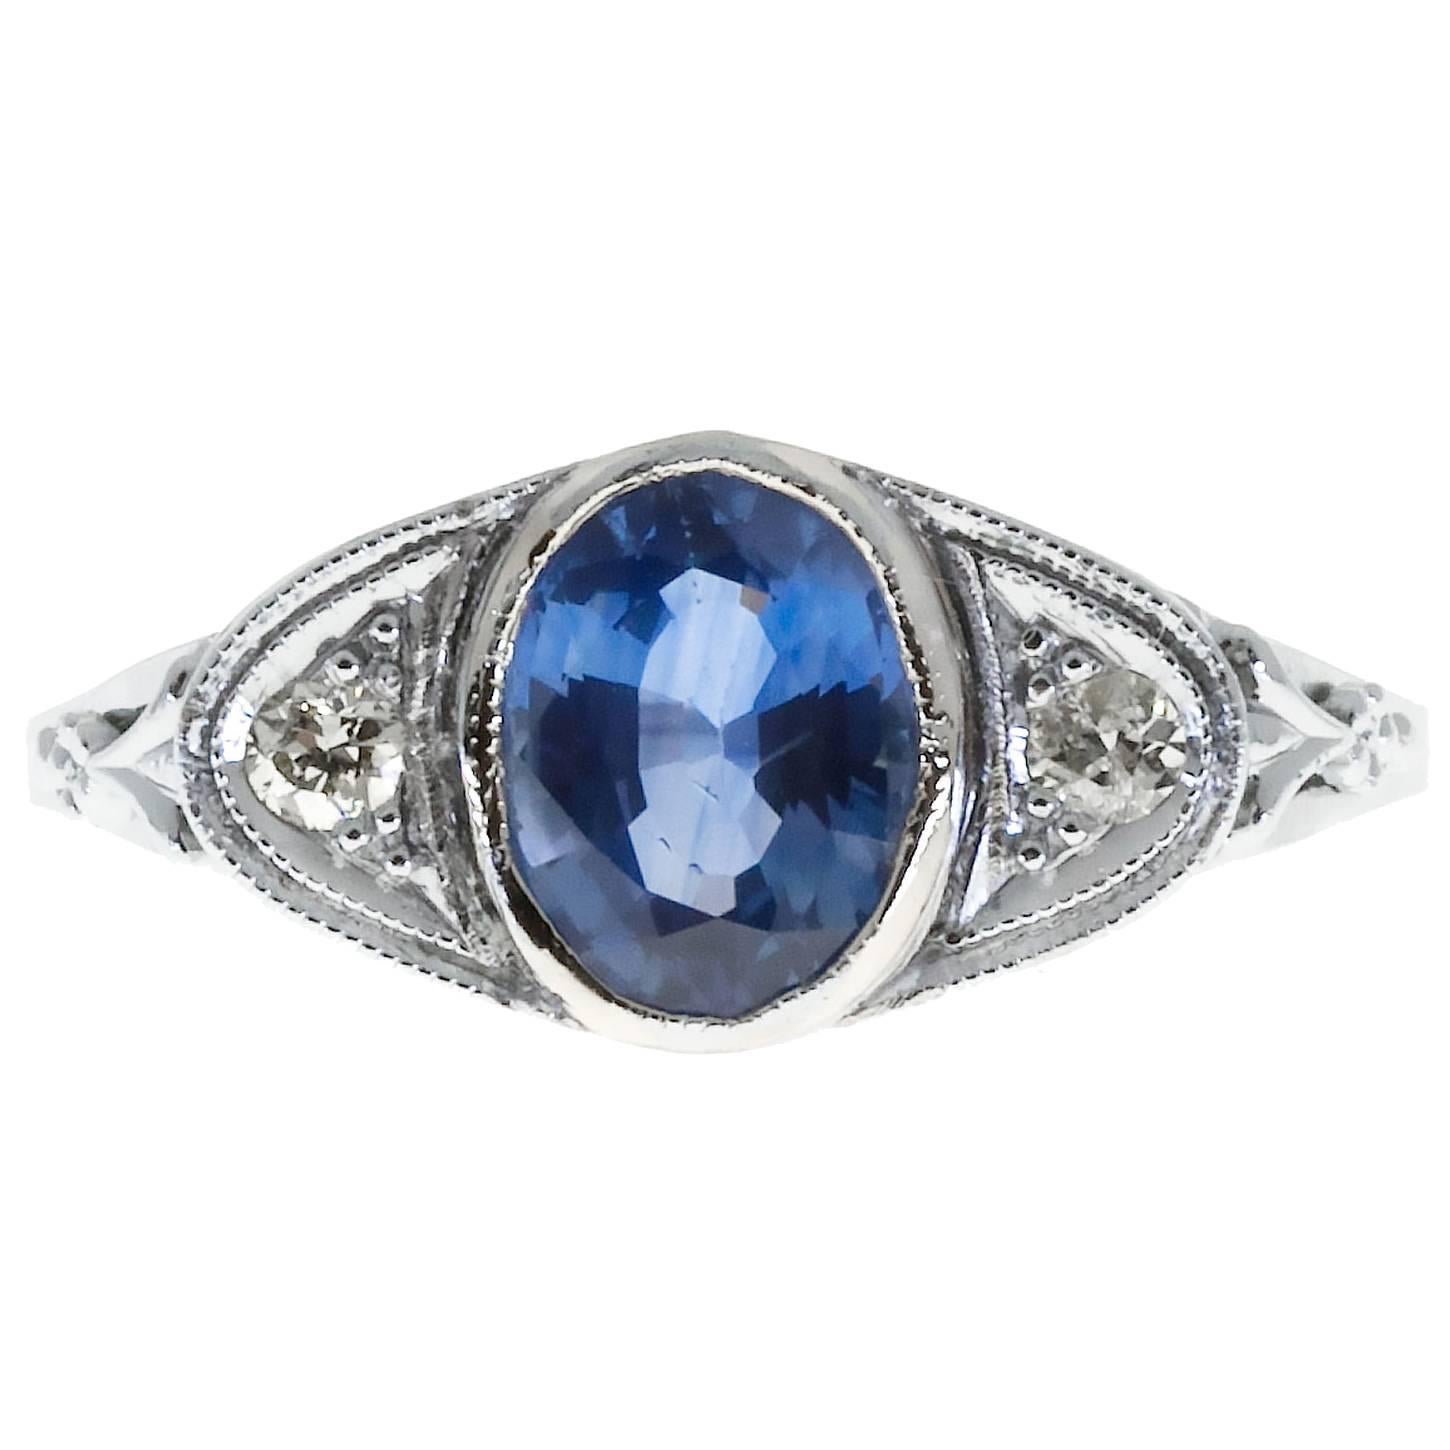  Oval Sapphire Diamond Hand Pierced Engraved Filigree Gold engagement Ring. Flat top is set in the center with a vibrant bright blue genuine sapphire. On either side is a fine white old European cut diamond. Circa 1940-1949.

1 round sapphire